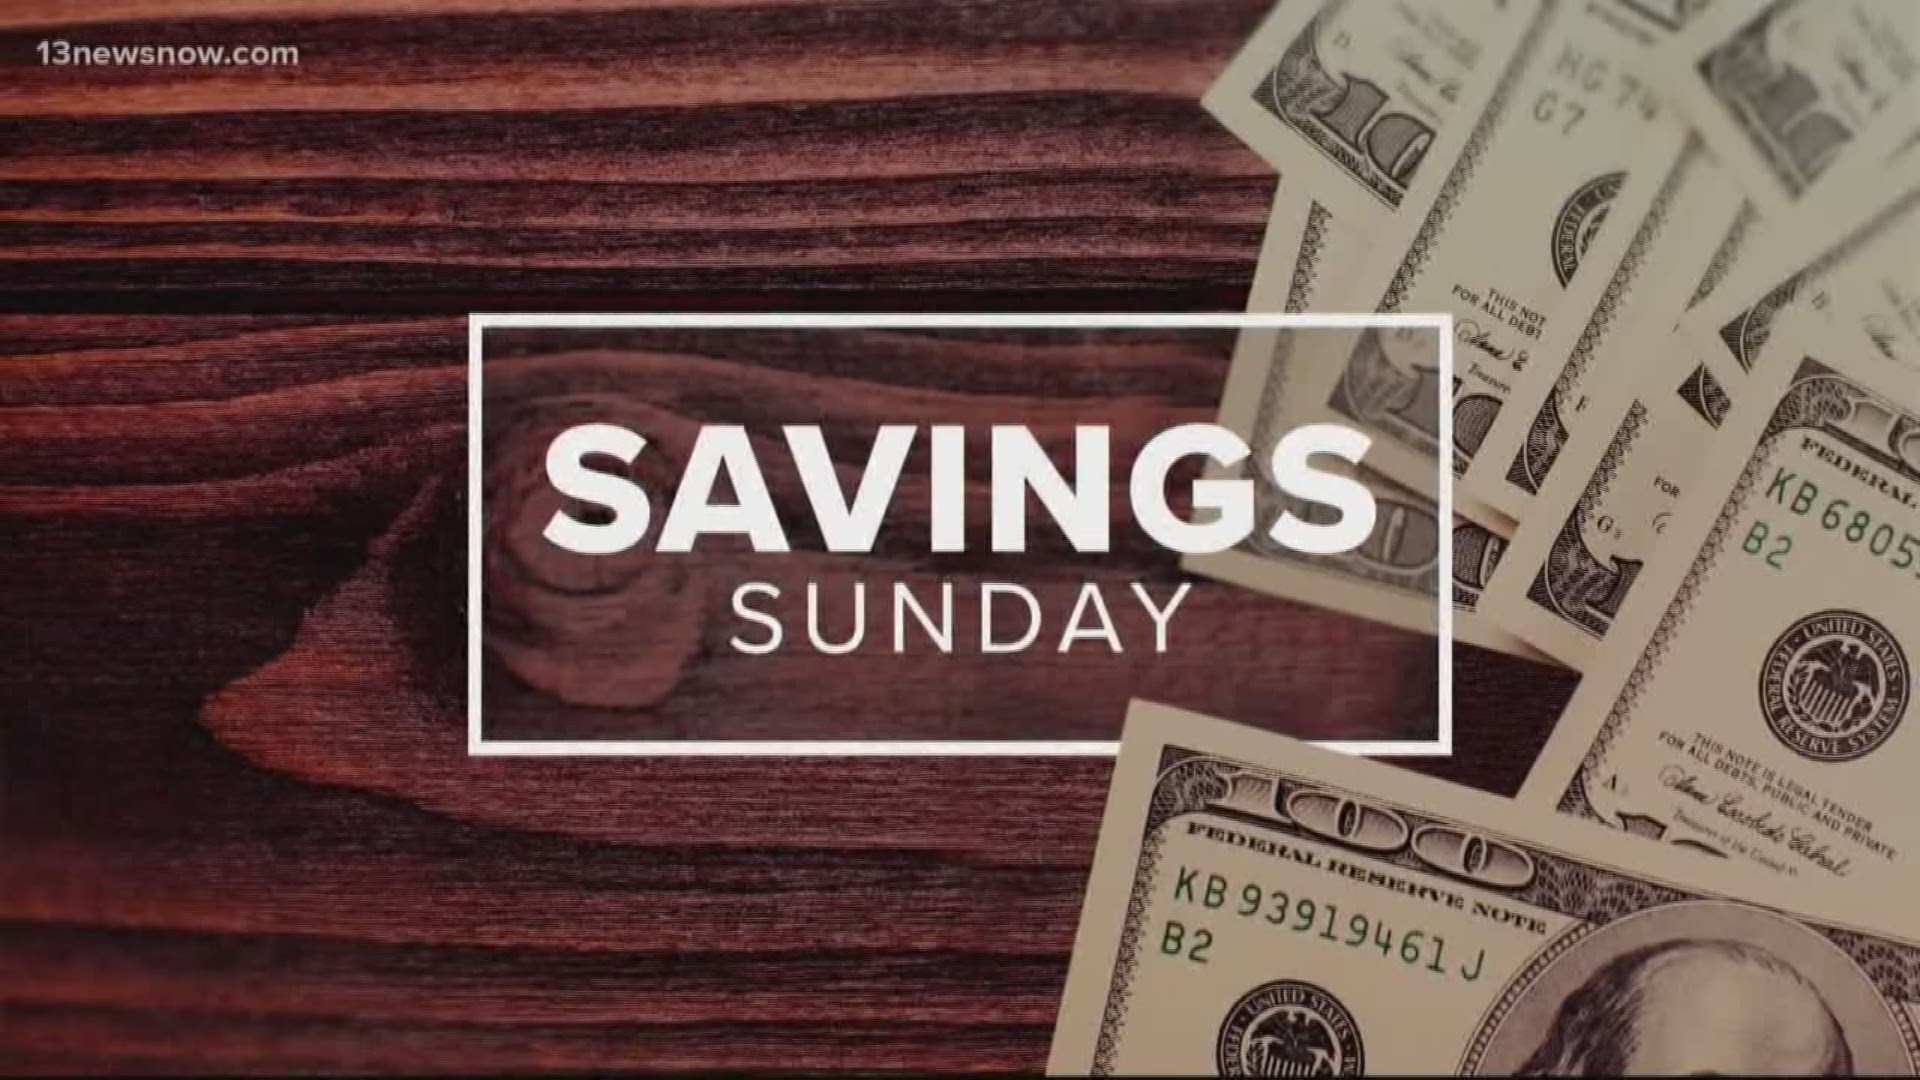 Laura Oliver from www.afrugalchick.com has your big savings for the week of March 10, 2019.